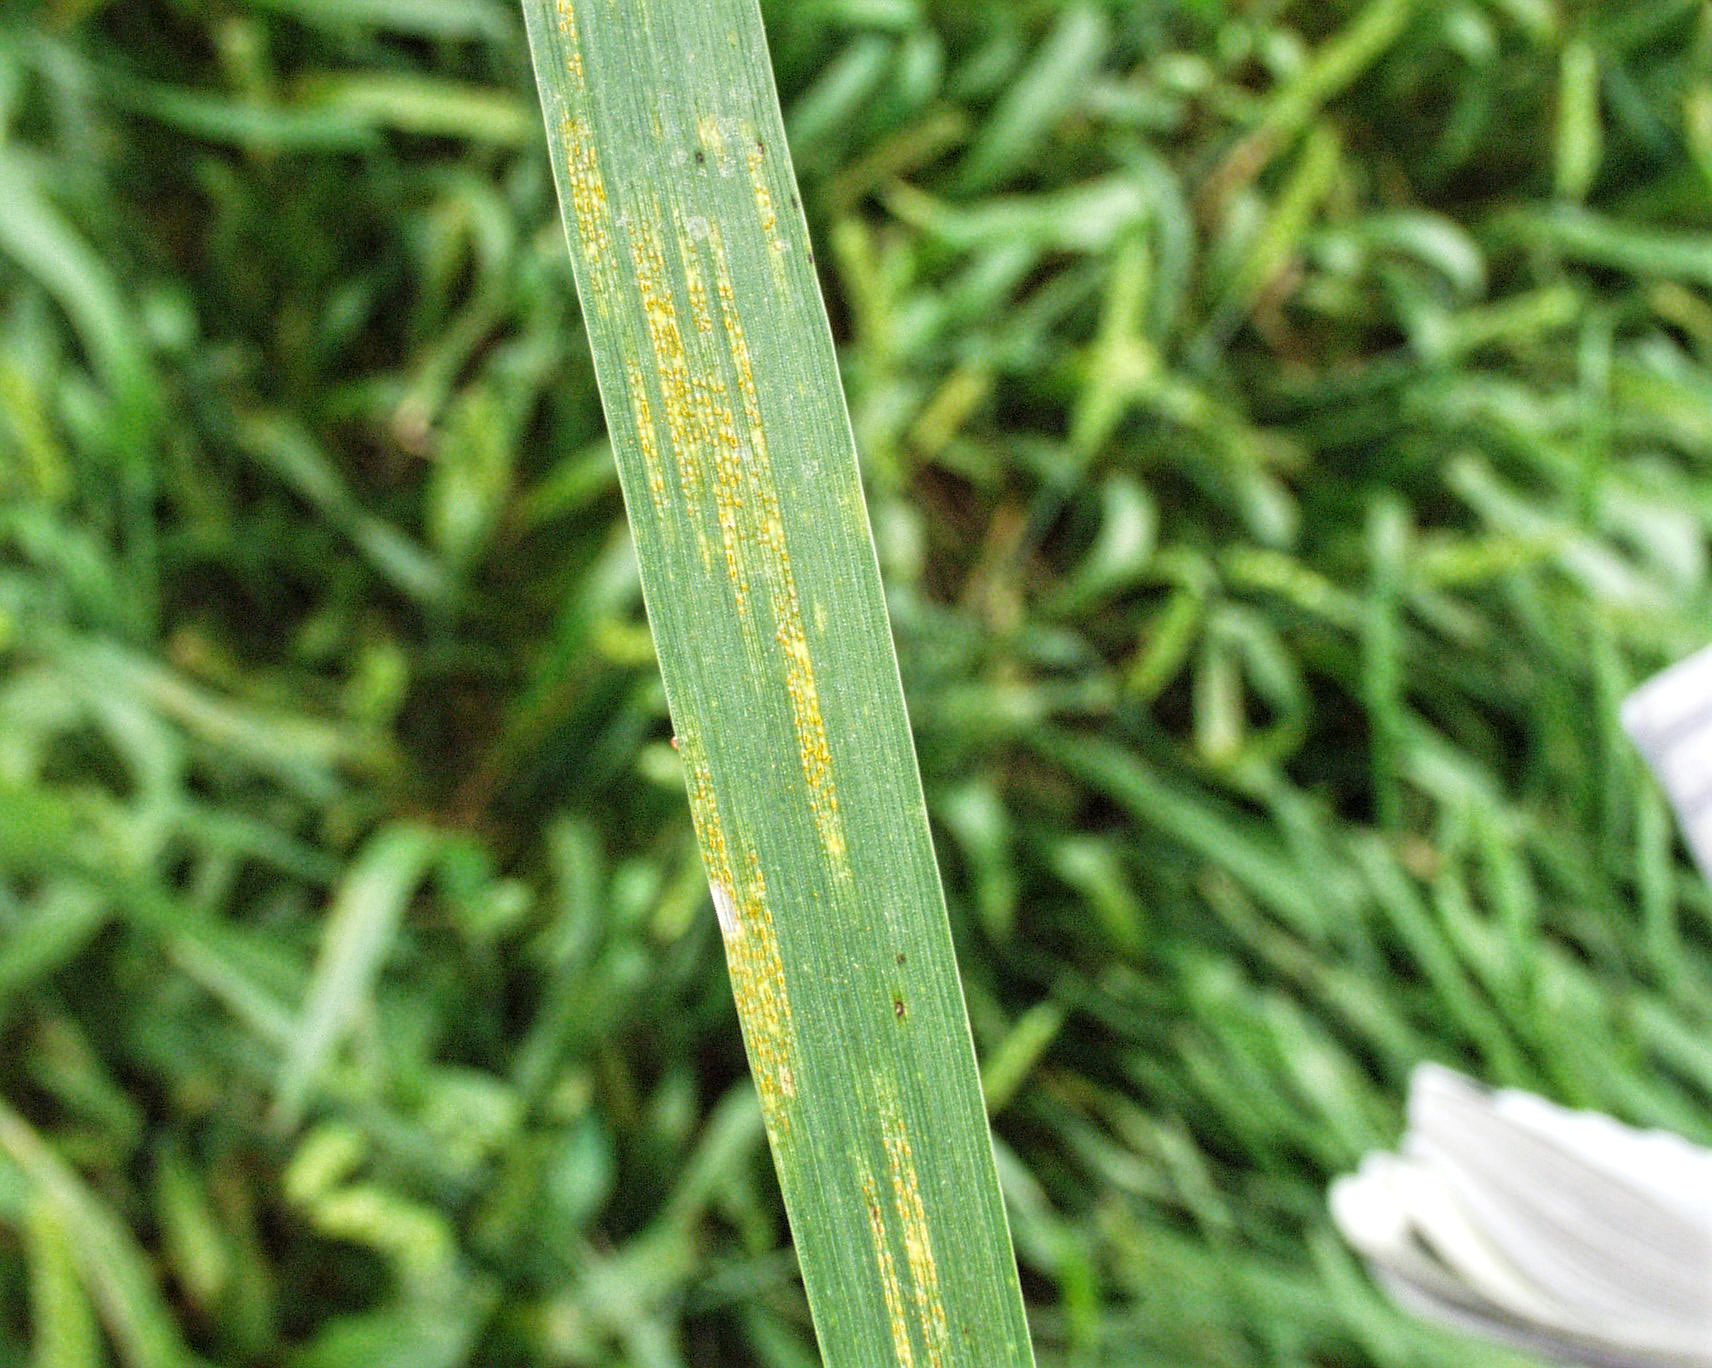 Wheat leaf rust and stripe rust an emerging problem statewide